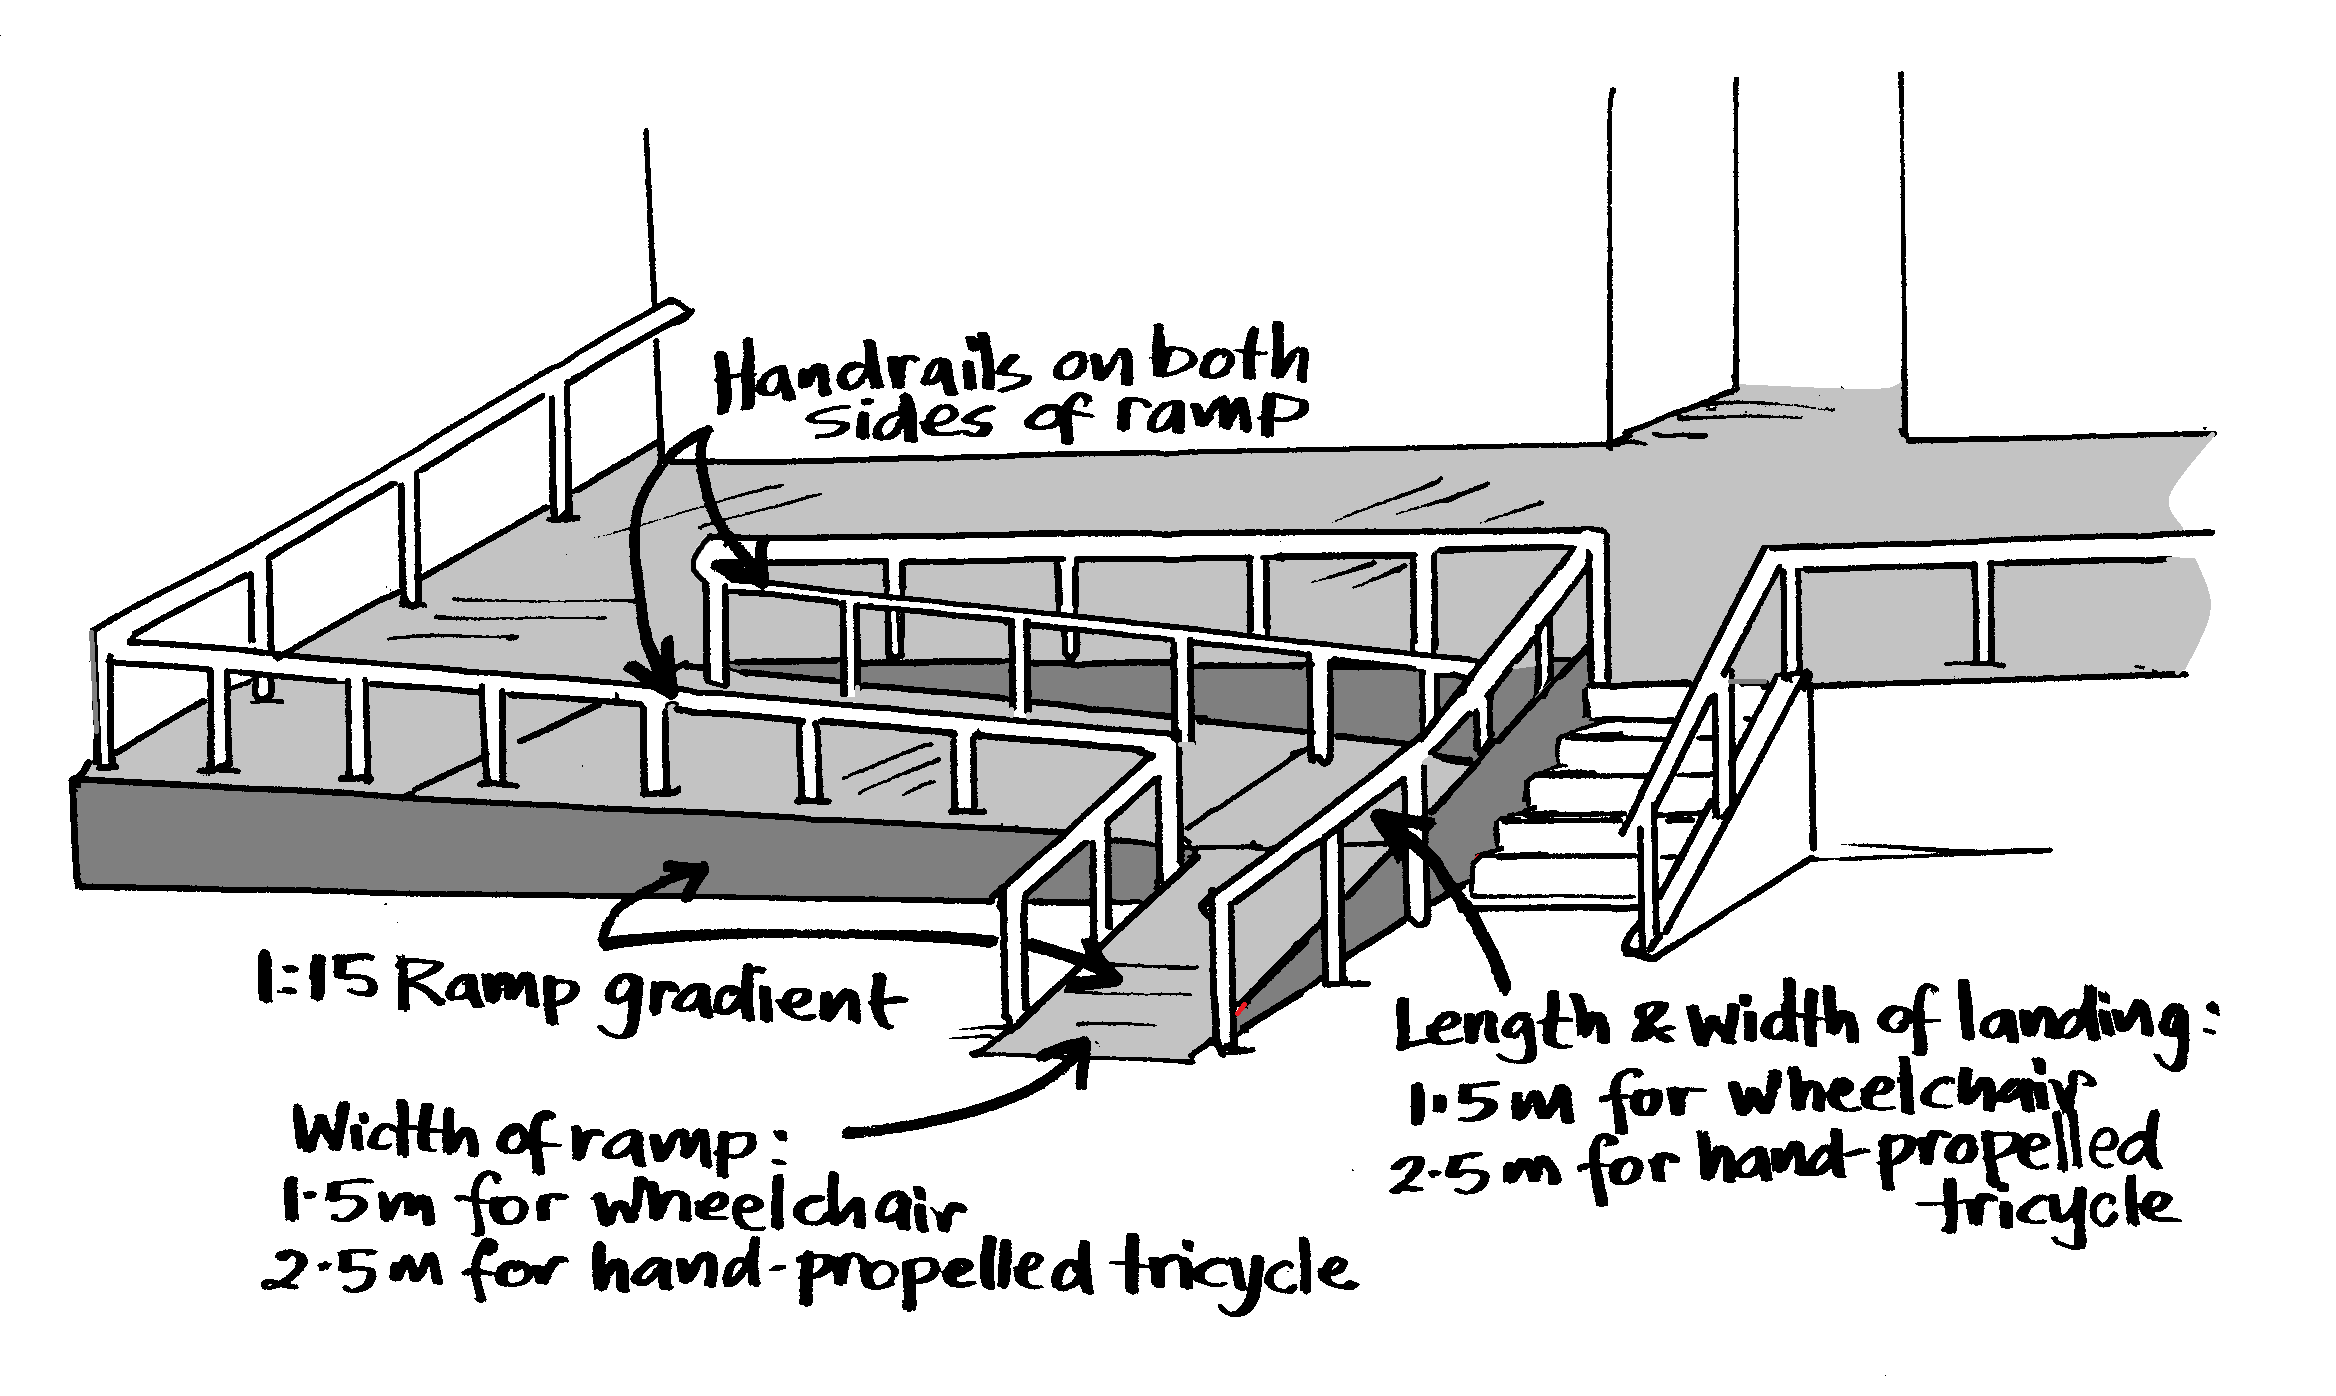 A 3 directions ramp leading up to a house. Width (1500-2500mm), ramp gradient 1:15, landing space (length/width 1500-2500mm). Handrails on both sides. "A ramp that changes direction to accommodate space around the building"